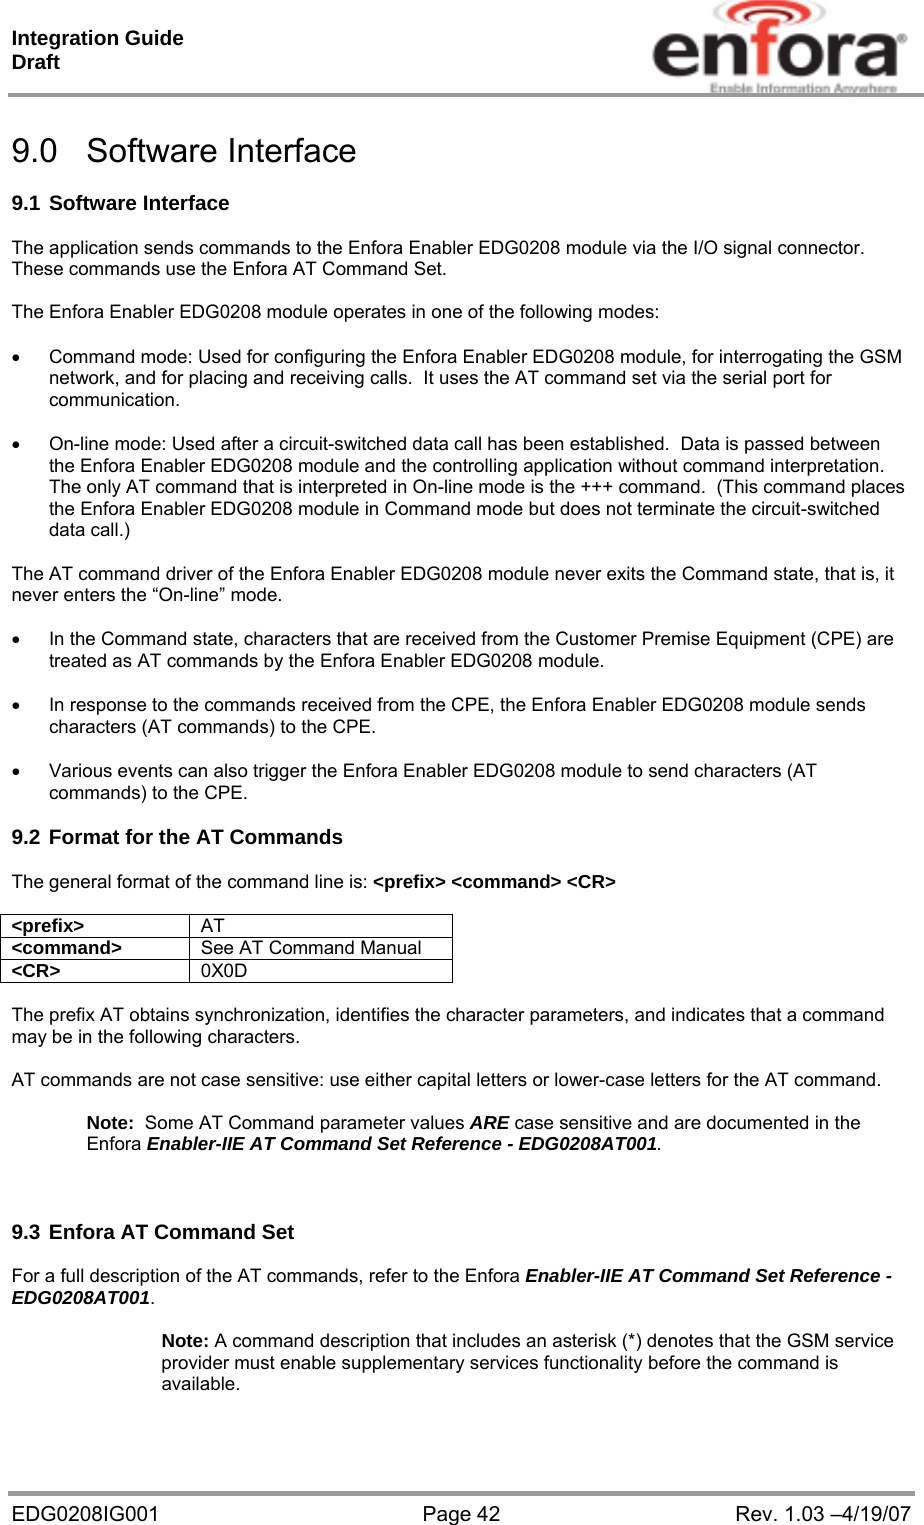 Integration Guide  Draft EDG0208IG001  Page 42  Rev. 1.03 –4/19/07  9.0 Software Interface  9.1 Software Interface  The application sends commands to the Enfora Enabler EDG0208 module via the I/O signal connector. These commands use the Enfora AT Command Set.  The Enfora Enabler EDG0208 module operates in one of the following modes:    Command mode: Used for configuring the Enfora Enabler EDG0208 module, for interrogating the GSM network, and for placing and receiving calls.  It uses the AT command set via the serial port for communication.    On-line mode: Used after a circuit-switched data call has been established.  Data is passed between the Enfora Enabler EDG0208 module and the controlling application without command interpretation.  The only AT command that is interpreted in On-line mode is the +++ command.  (This command places the Enfora Enabler EDG0208 module in Command mode but does not terminate the circuit-switched data call.)  The AT command driver of the Enfora Enabler EDG0208 module never exits the Command state, that is, it never enters the “On-line” mode.      In the Command state, characters that are received from the Customer Premise Equipment (CPE) are treated as AT commands by the Enfora Enabler EDG0208 module.    In response to the commands received from the CPE, the Enfora Enabler EDG0208 module sends characters (AT commands) to the CPE.    Various events can also trigger the Enfora Enabler EDG0208 module to send characters (AT commands) to the CPE.  9.2 Format for the AT Commands  The general format of the command line is: &lt;prefix&gt; &lt;command&gt; &lt;CR&gt;  &lt;prefix&gt;  AT &lt;command&gt;  See AT Command Manual &lt;CR&gt;  0X0D  The prefix AT obtains synchronization, identifies the character parameters, and indicates that a command may be in the following characters.  AT commands are not case sensitive: use either capital letters or lower-case letters for the AT command.    Note:  Some AT Command parameter values ARE case sensitive and are documented in the Enfora Enabler-IIE AT Command Set Reference - EDG0208AT001.    9.3 Enfora AT Command Set  For a full description of the AT commands, refer to the Enfora Enabler-IIE AT Command Set Reference - EDG0208AT001.  Note: A command description that includes an asterisk (*) denotes that the GSM service provider must enable supplementary services functionality before the command is available.   